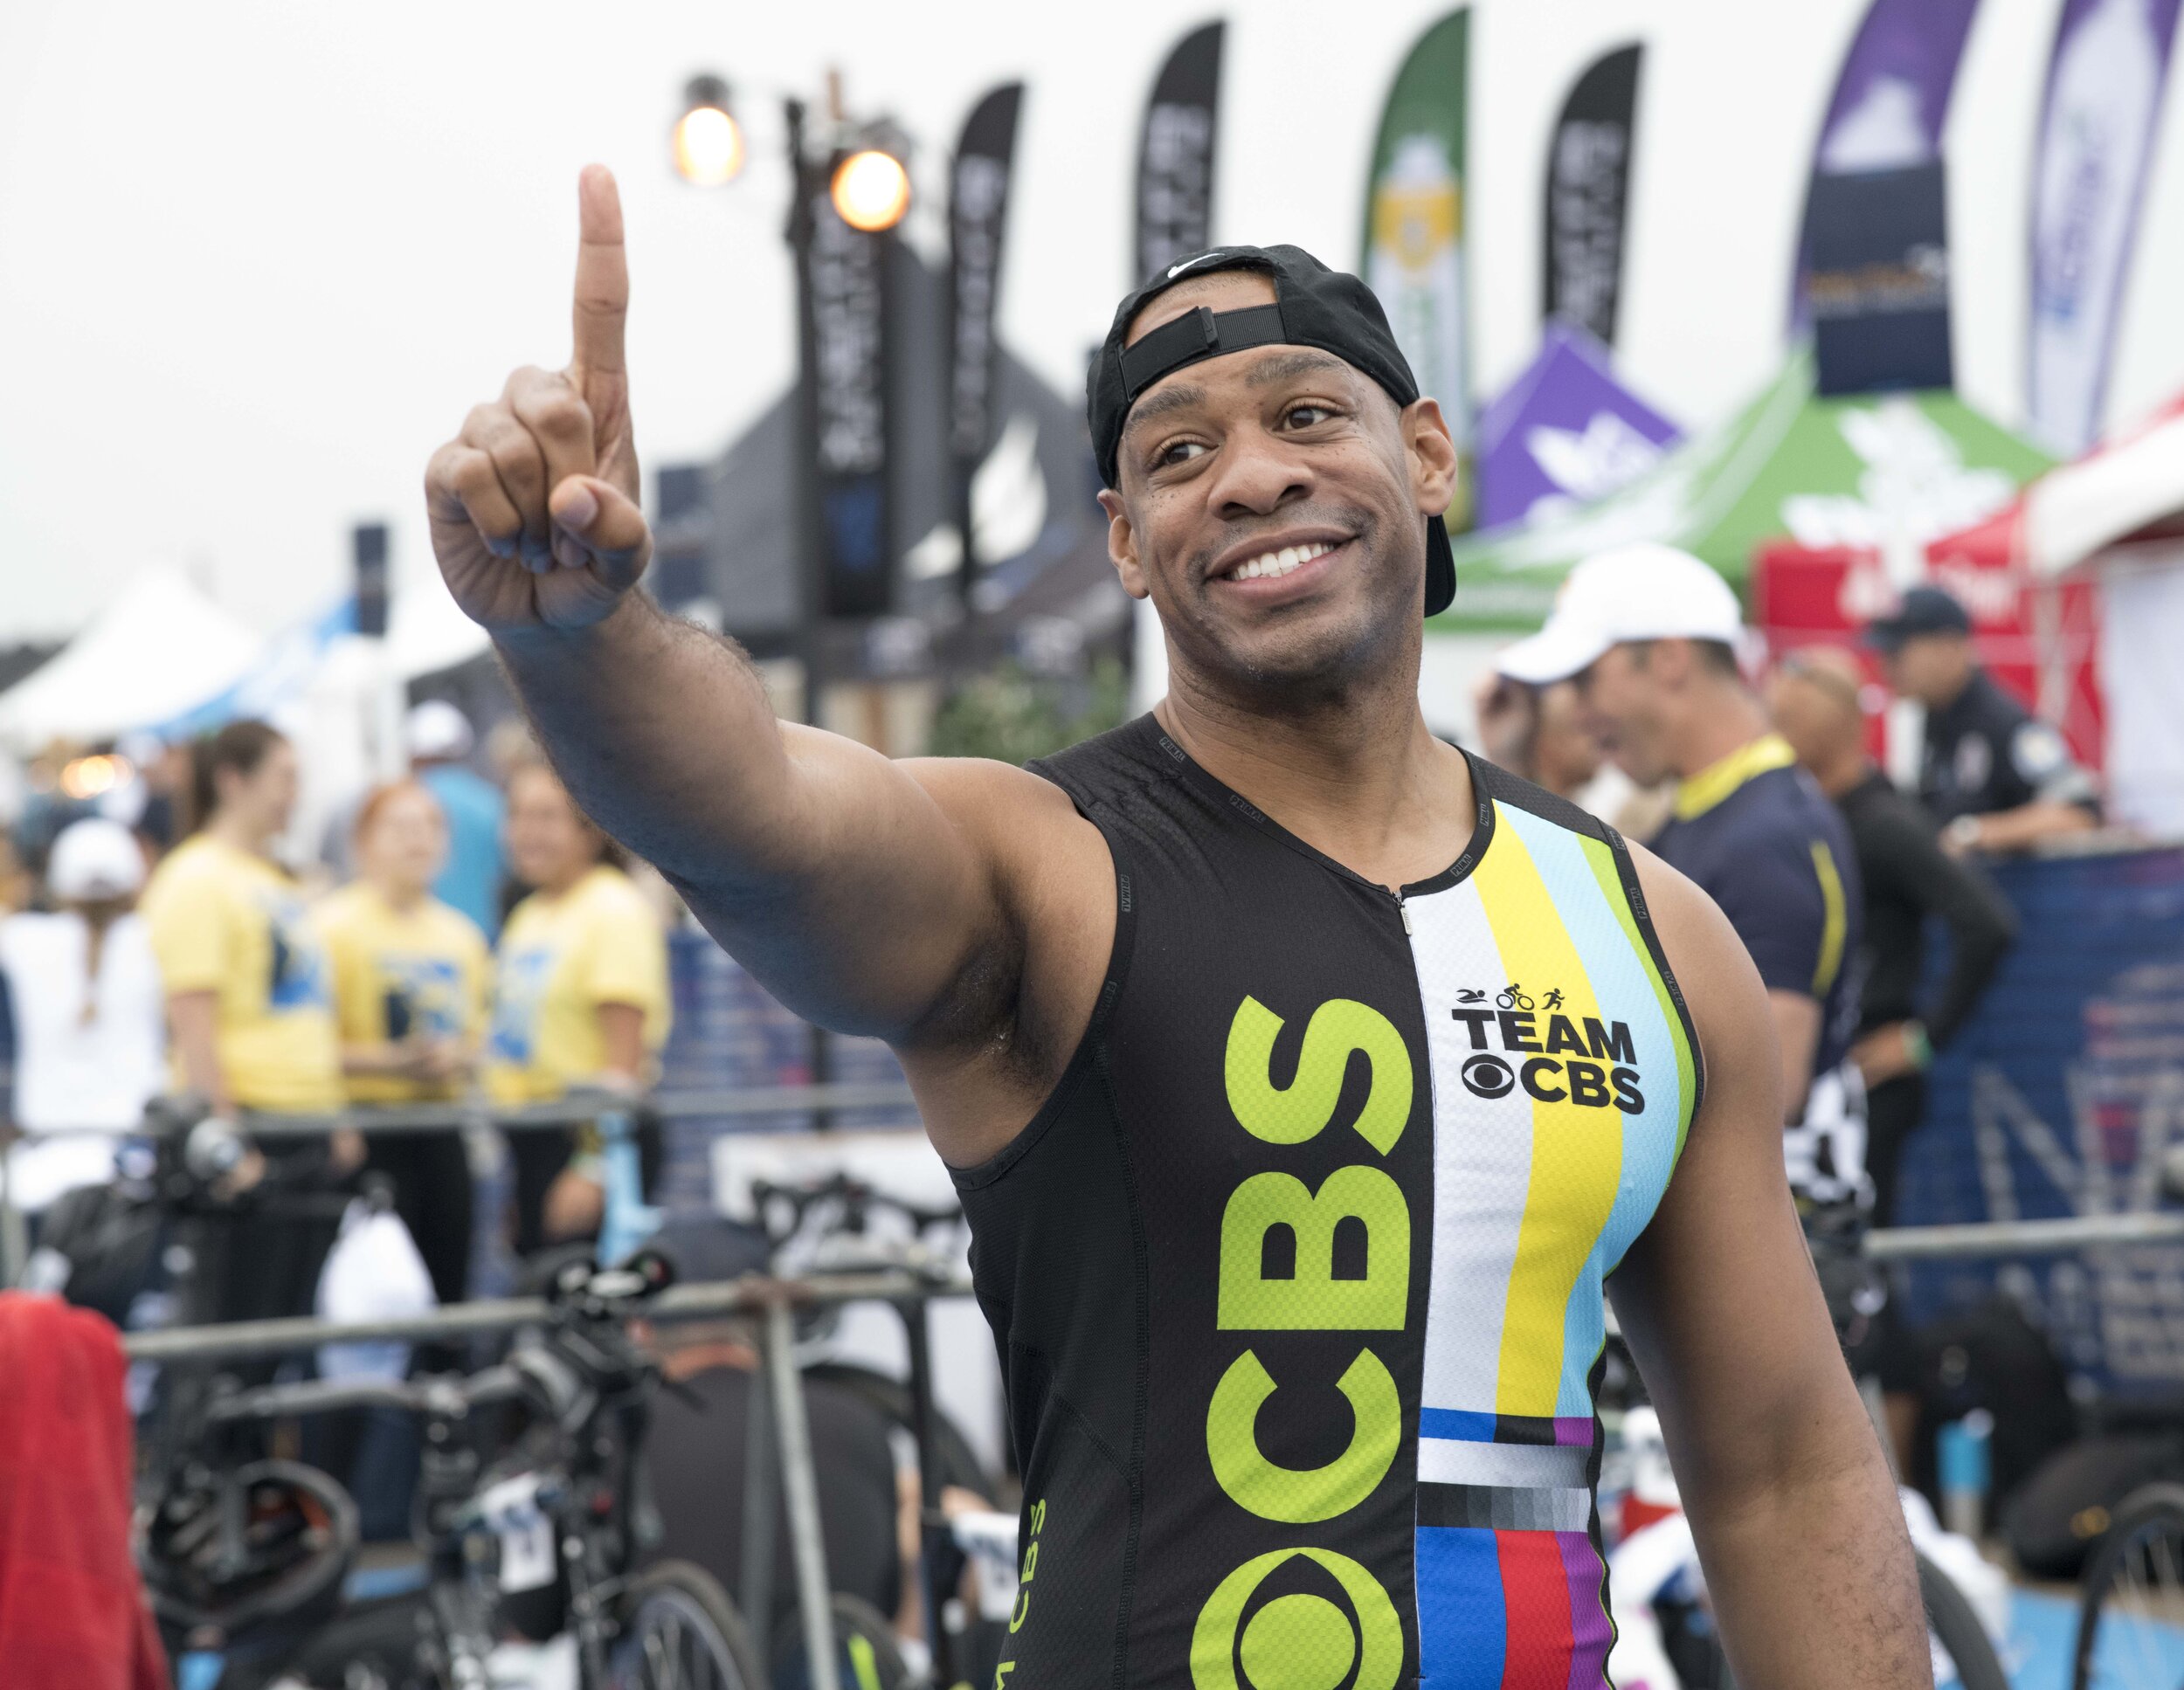  KCBS Los Angeles Anchor Demarco Morgan wags his finger in joy at the 33rd Nautica Malibu Triathlon on Zuma Beach in Malibu, Calif. on Sunday, September 15, 2019. (Photo by Kevin Tidmore/The Corsair) 